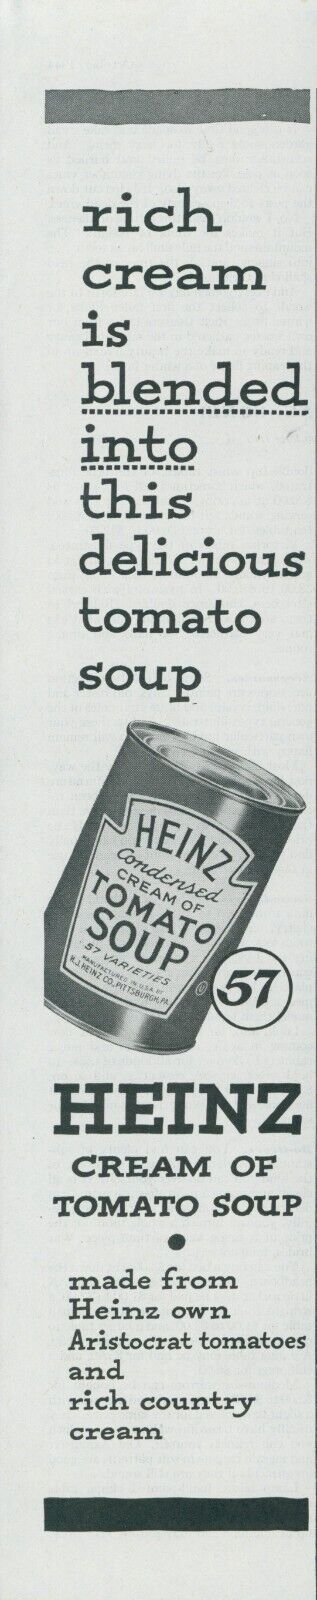 1944 Heinz Cream of Tomato Soup Canned Condensed Aristocrat 57 Print Ad LHJ1